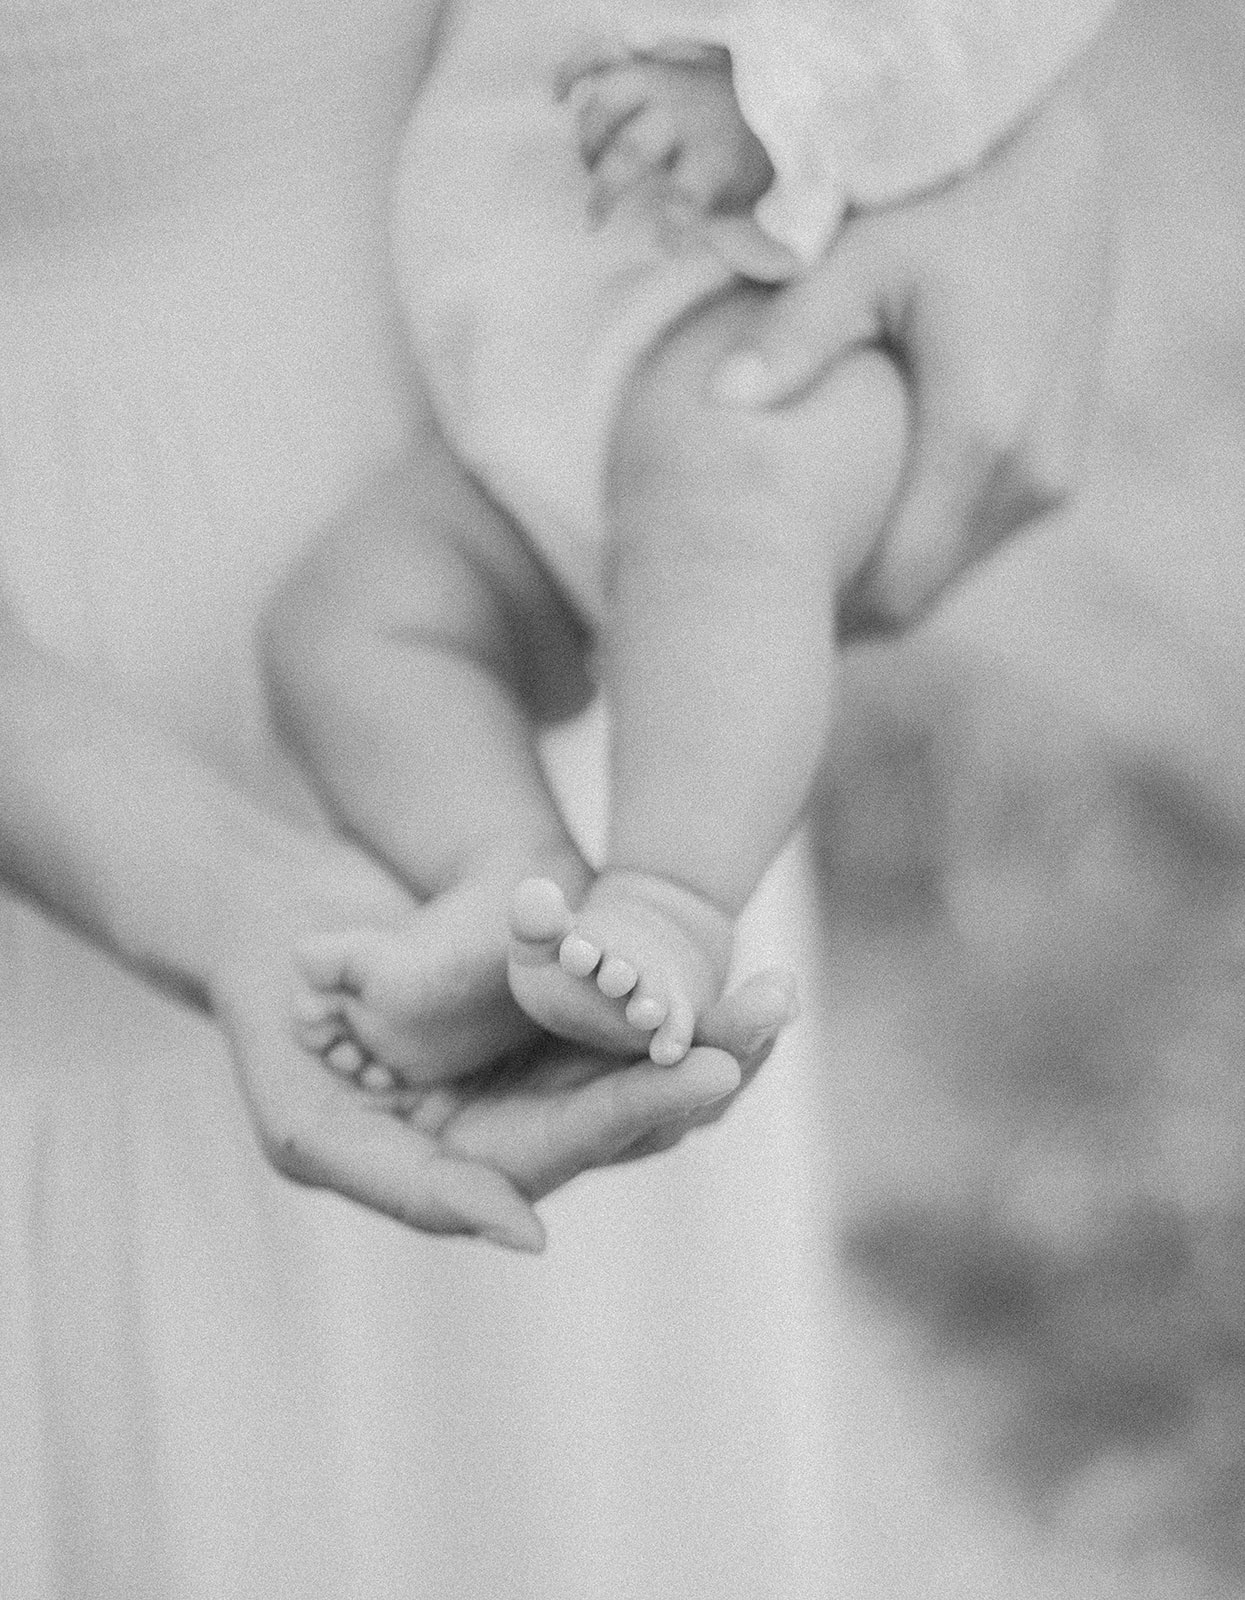 Boise foothills newborn session by Hannah Mann Photography